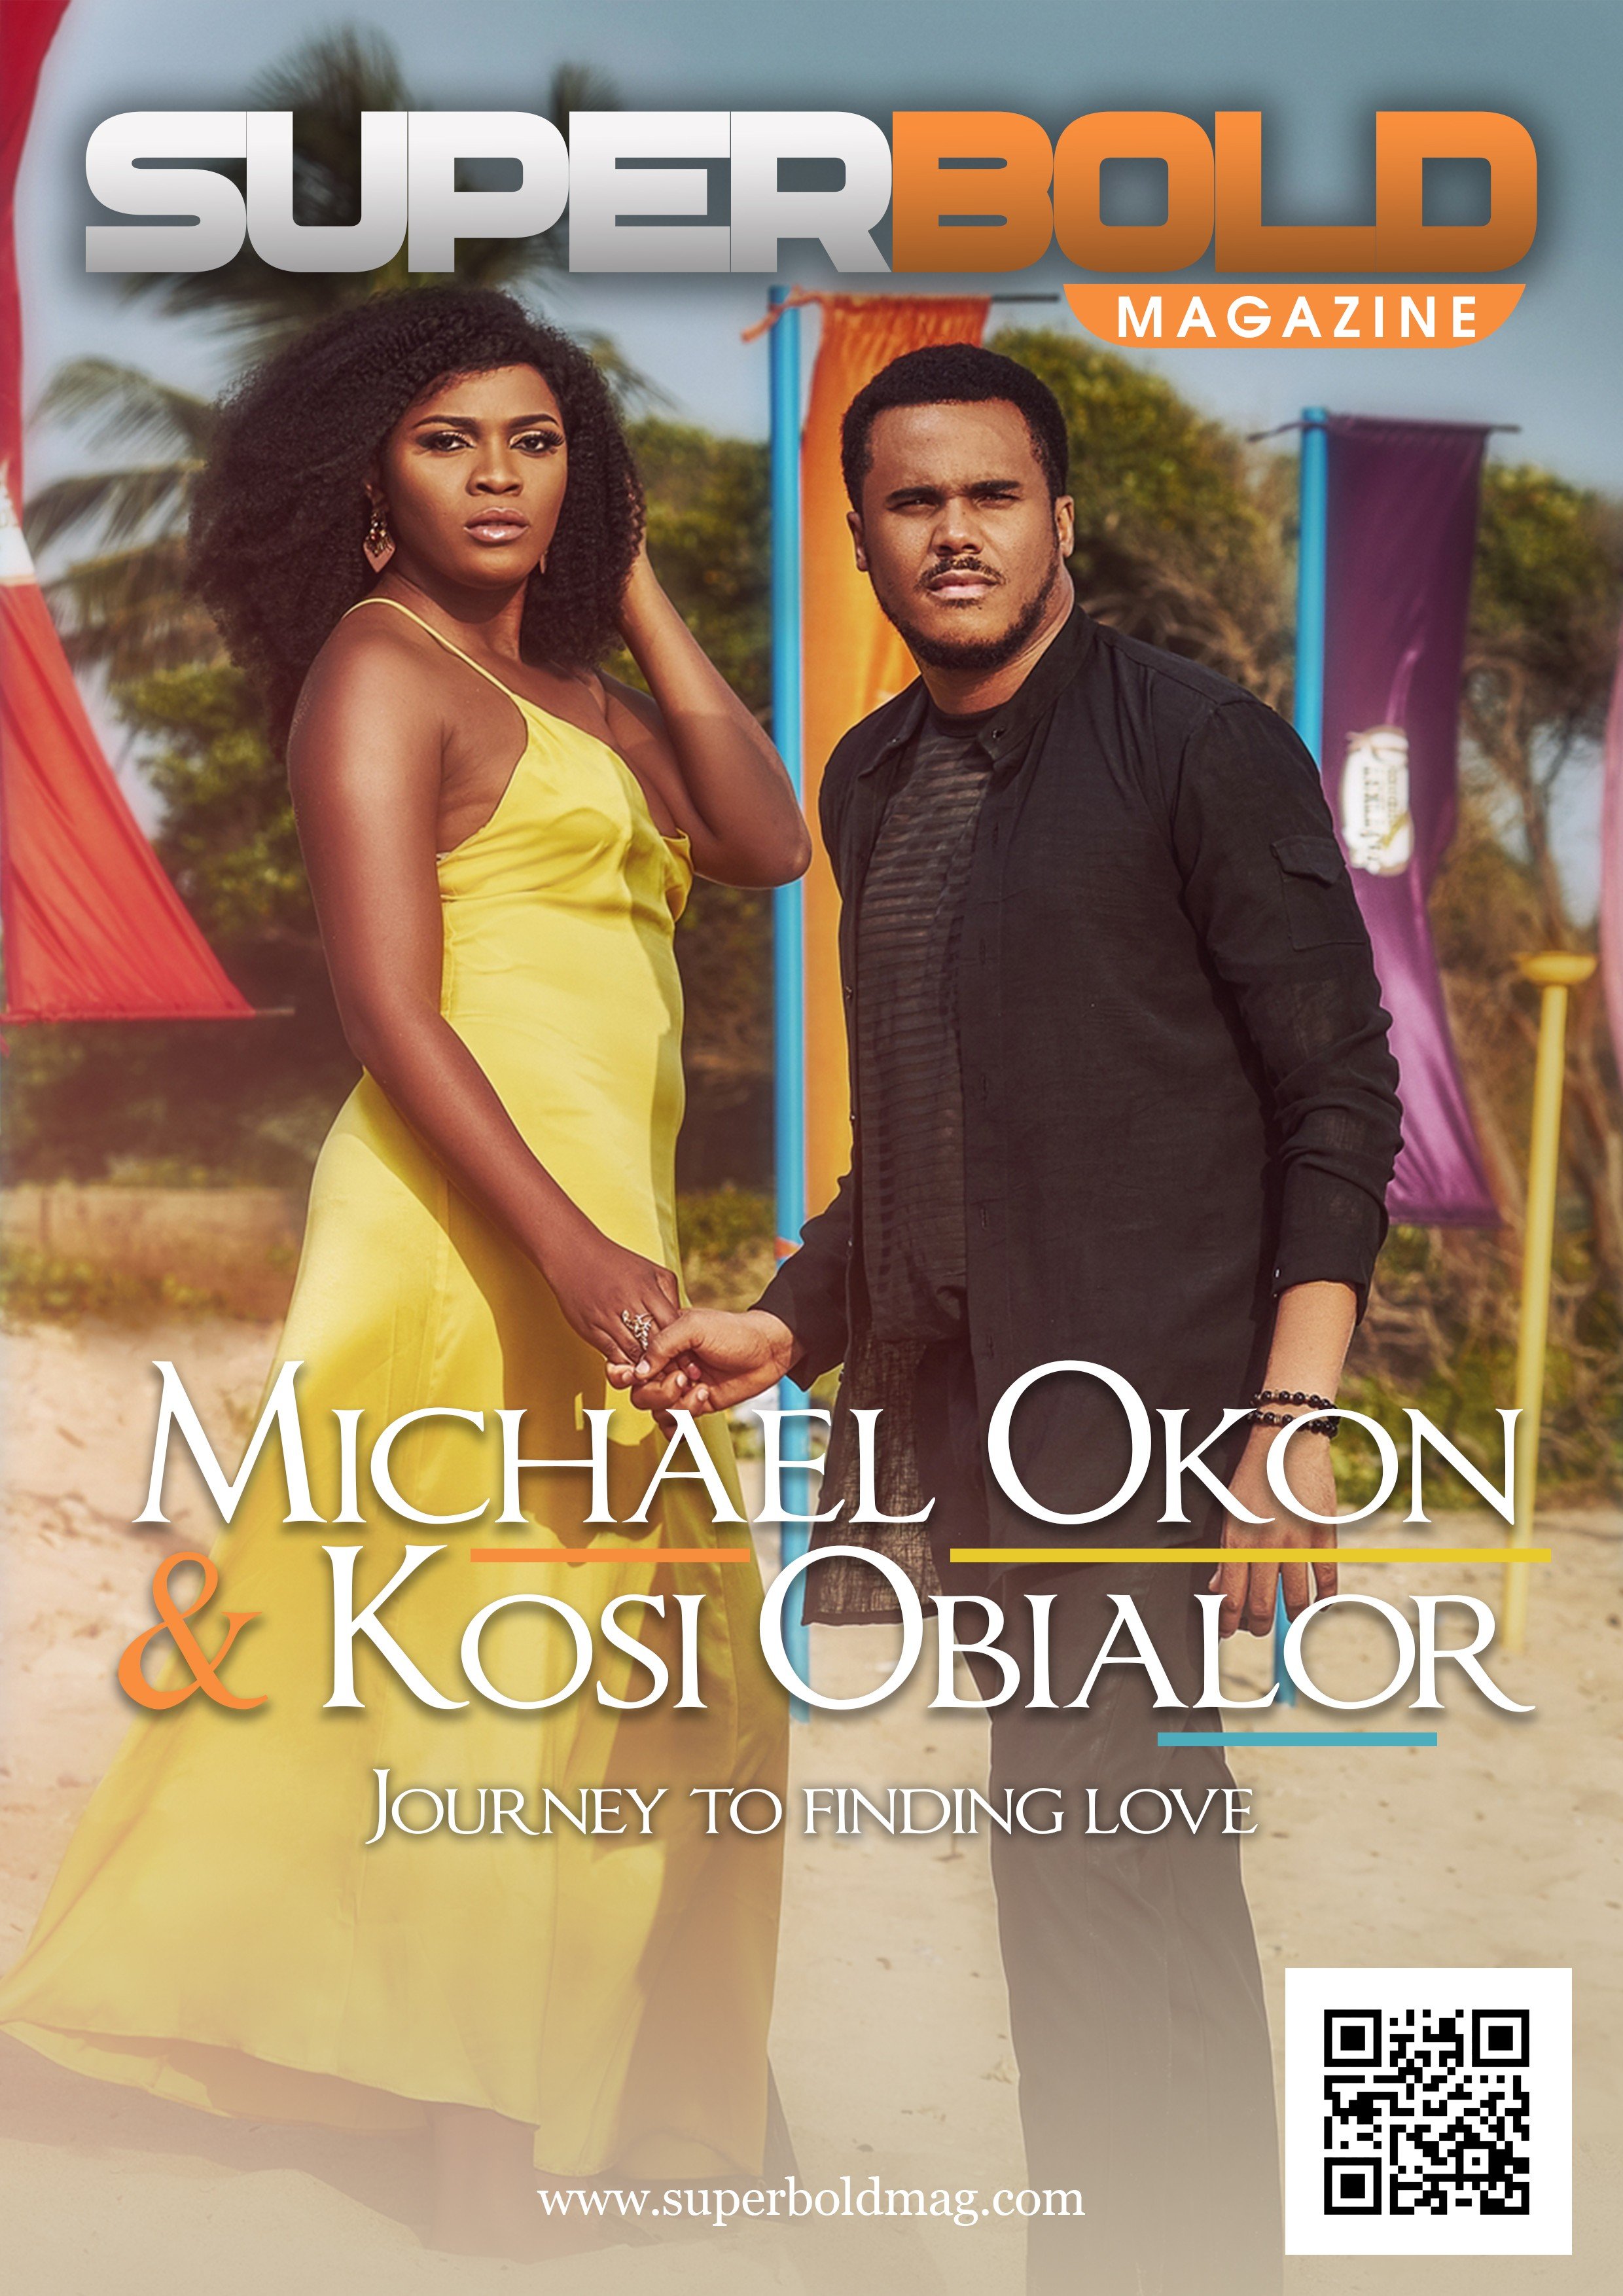 Actor Michael Okon and his fiancee, Kosi Obialor grace the cover of SuperBold Magazine